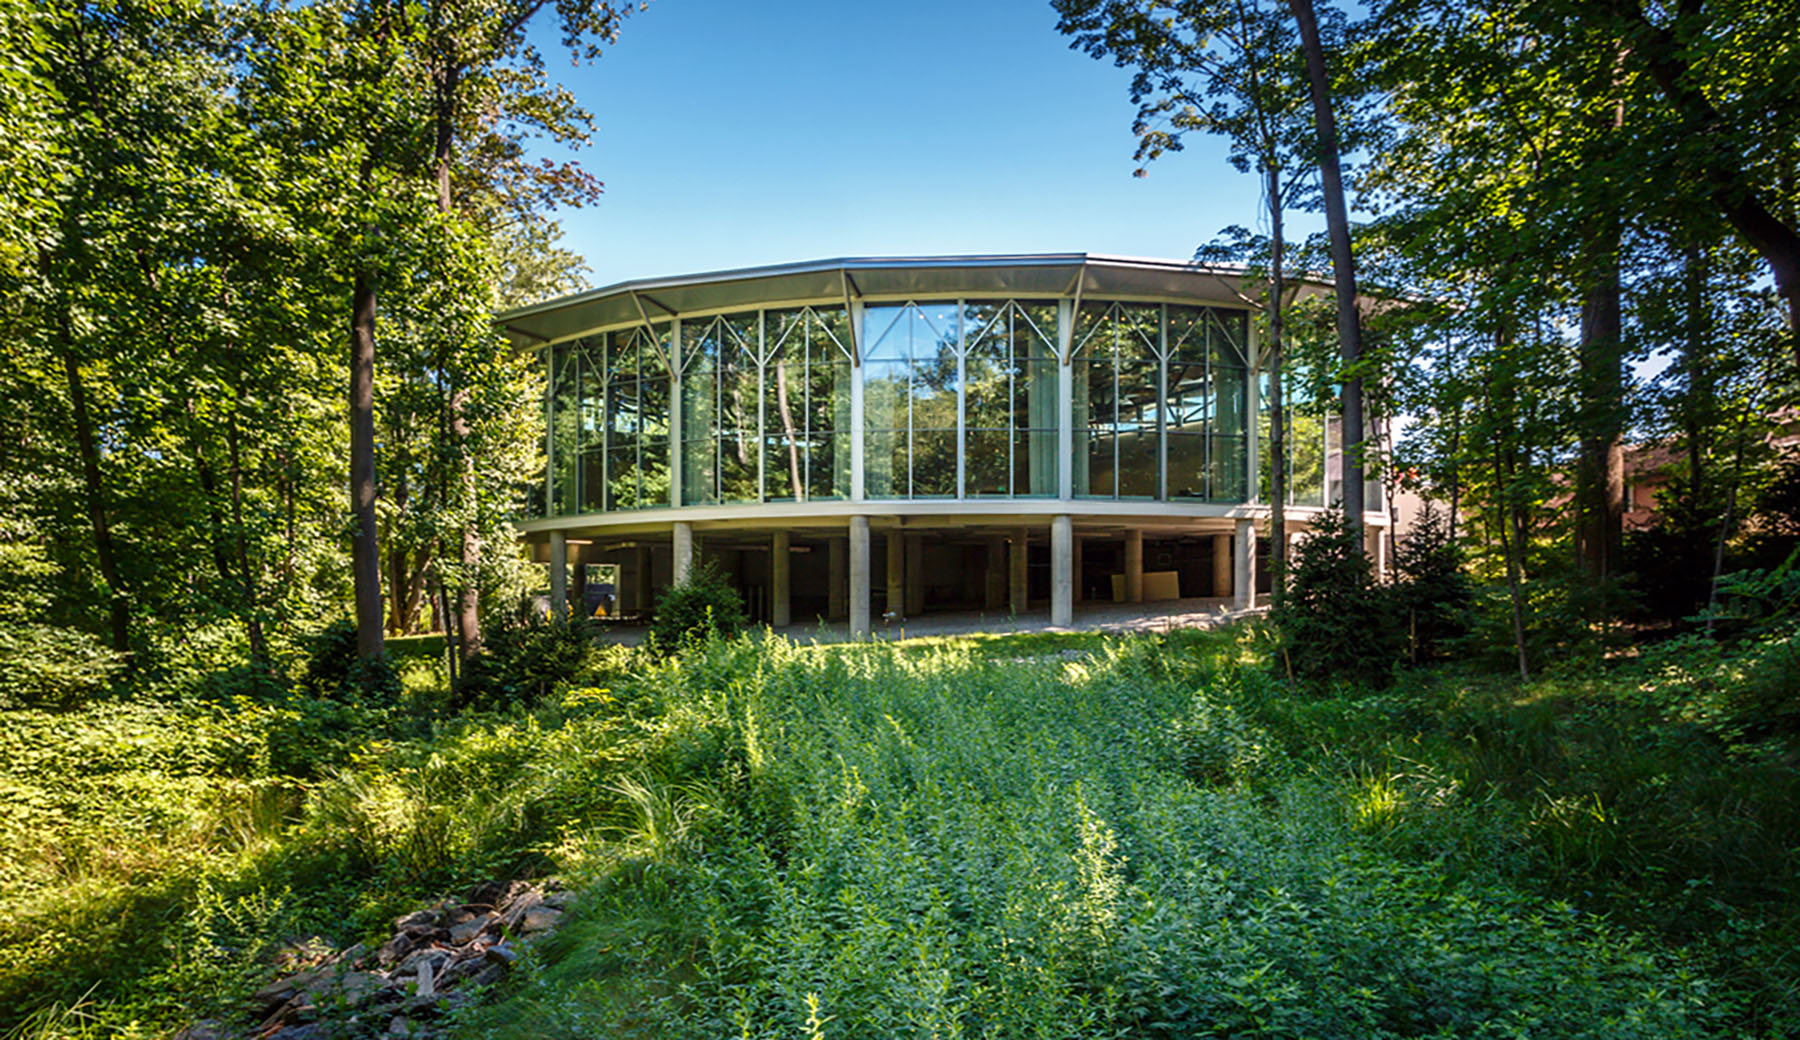 Temple Emanu-El asked Lothrop Associates to add a community room to their temple. The heavily wooded property allowed for spectacular natural views.   